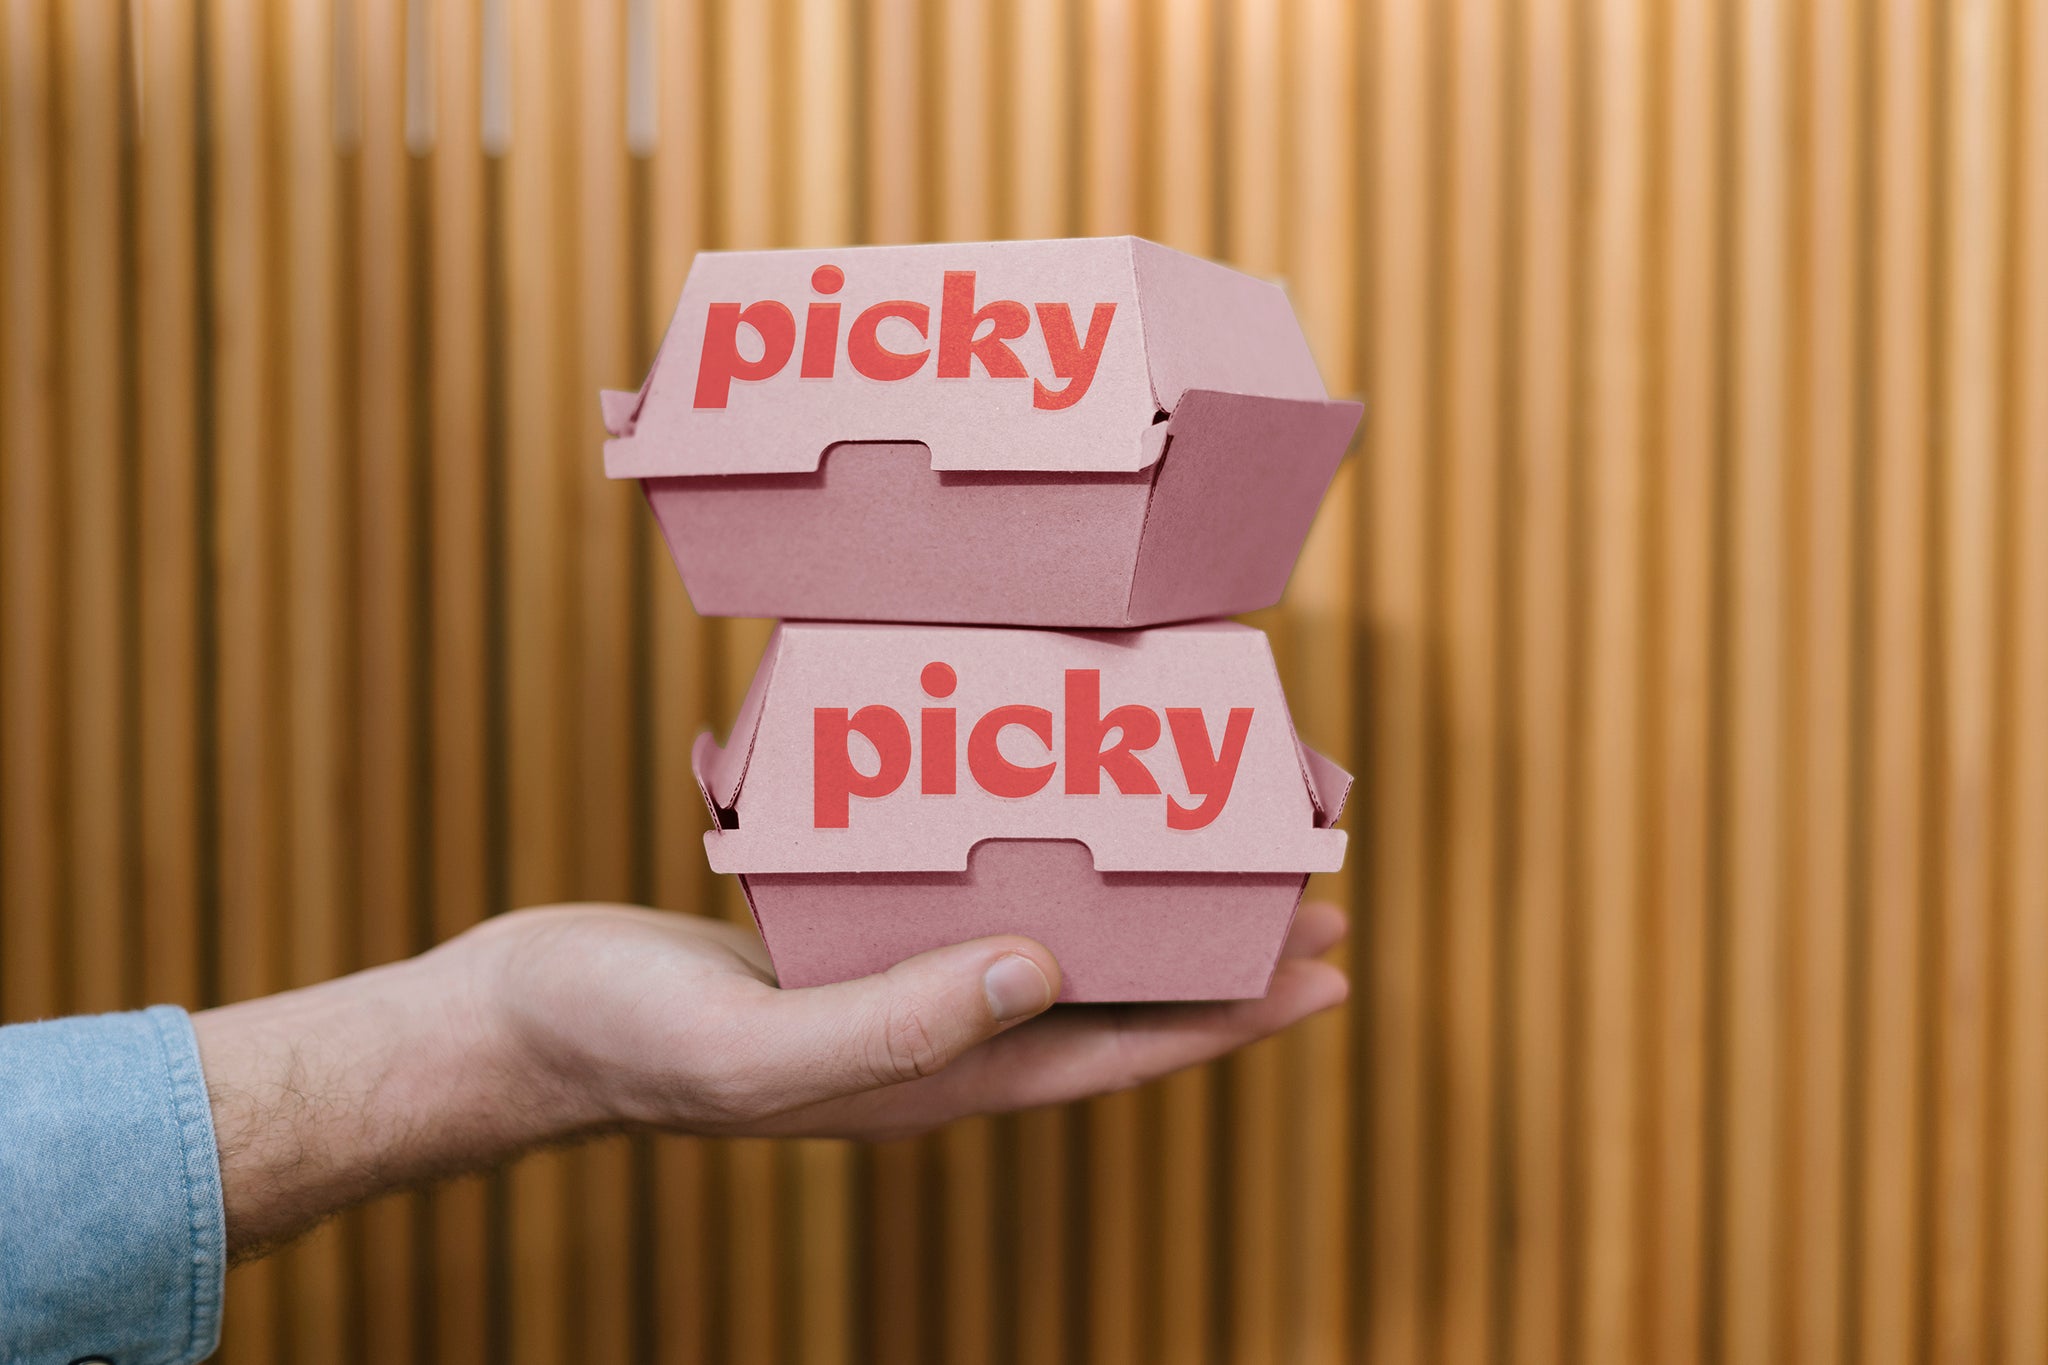 A white male hand with a visible blue denim sleeve is holding two pink cardboard burger boxes into the middle of the frame. Background is wooden poles. The word Picky is written in red on the front face of each box. 